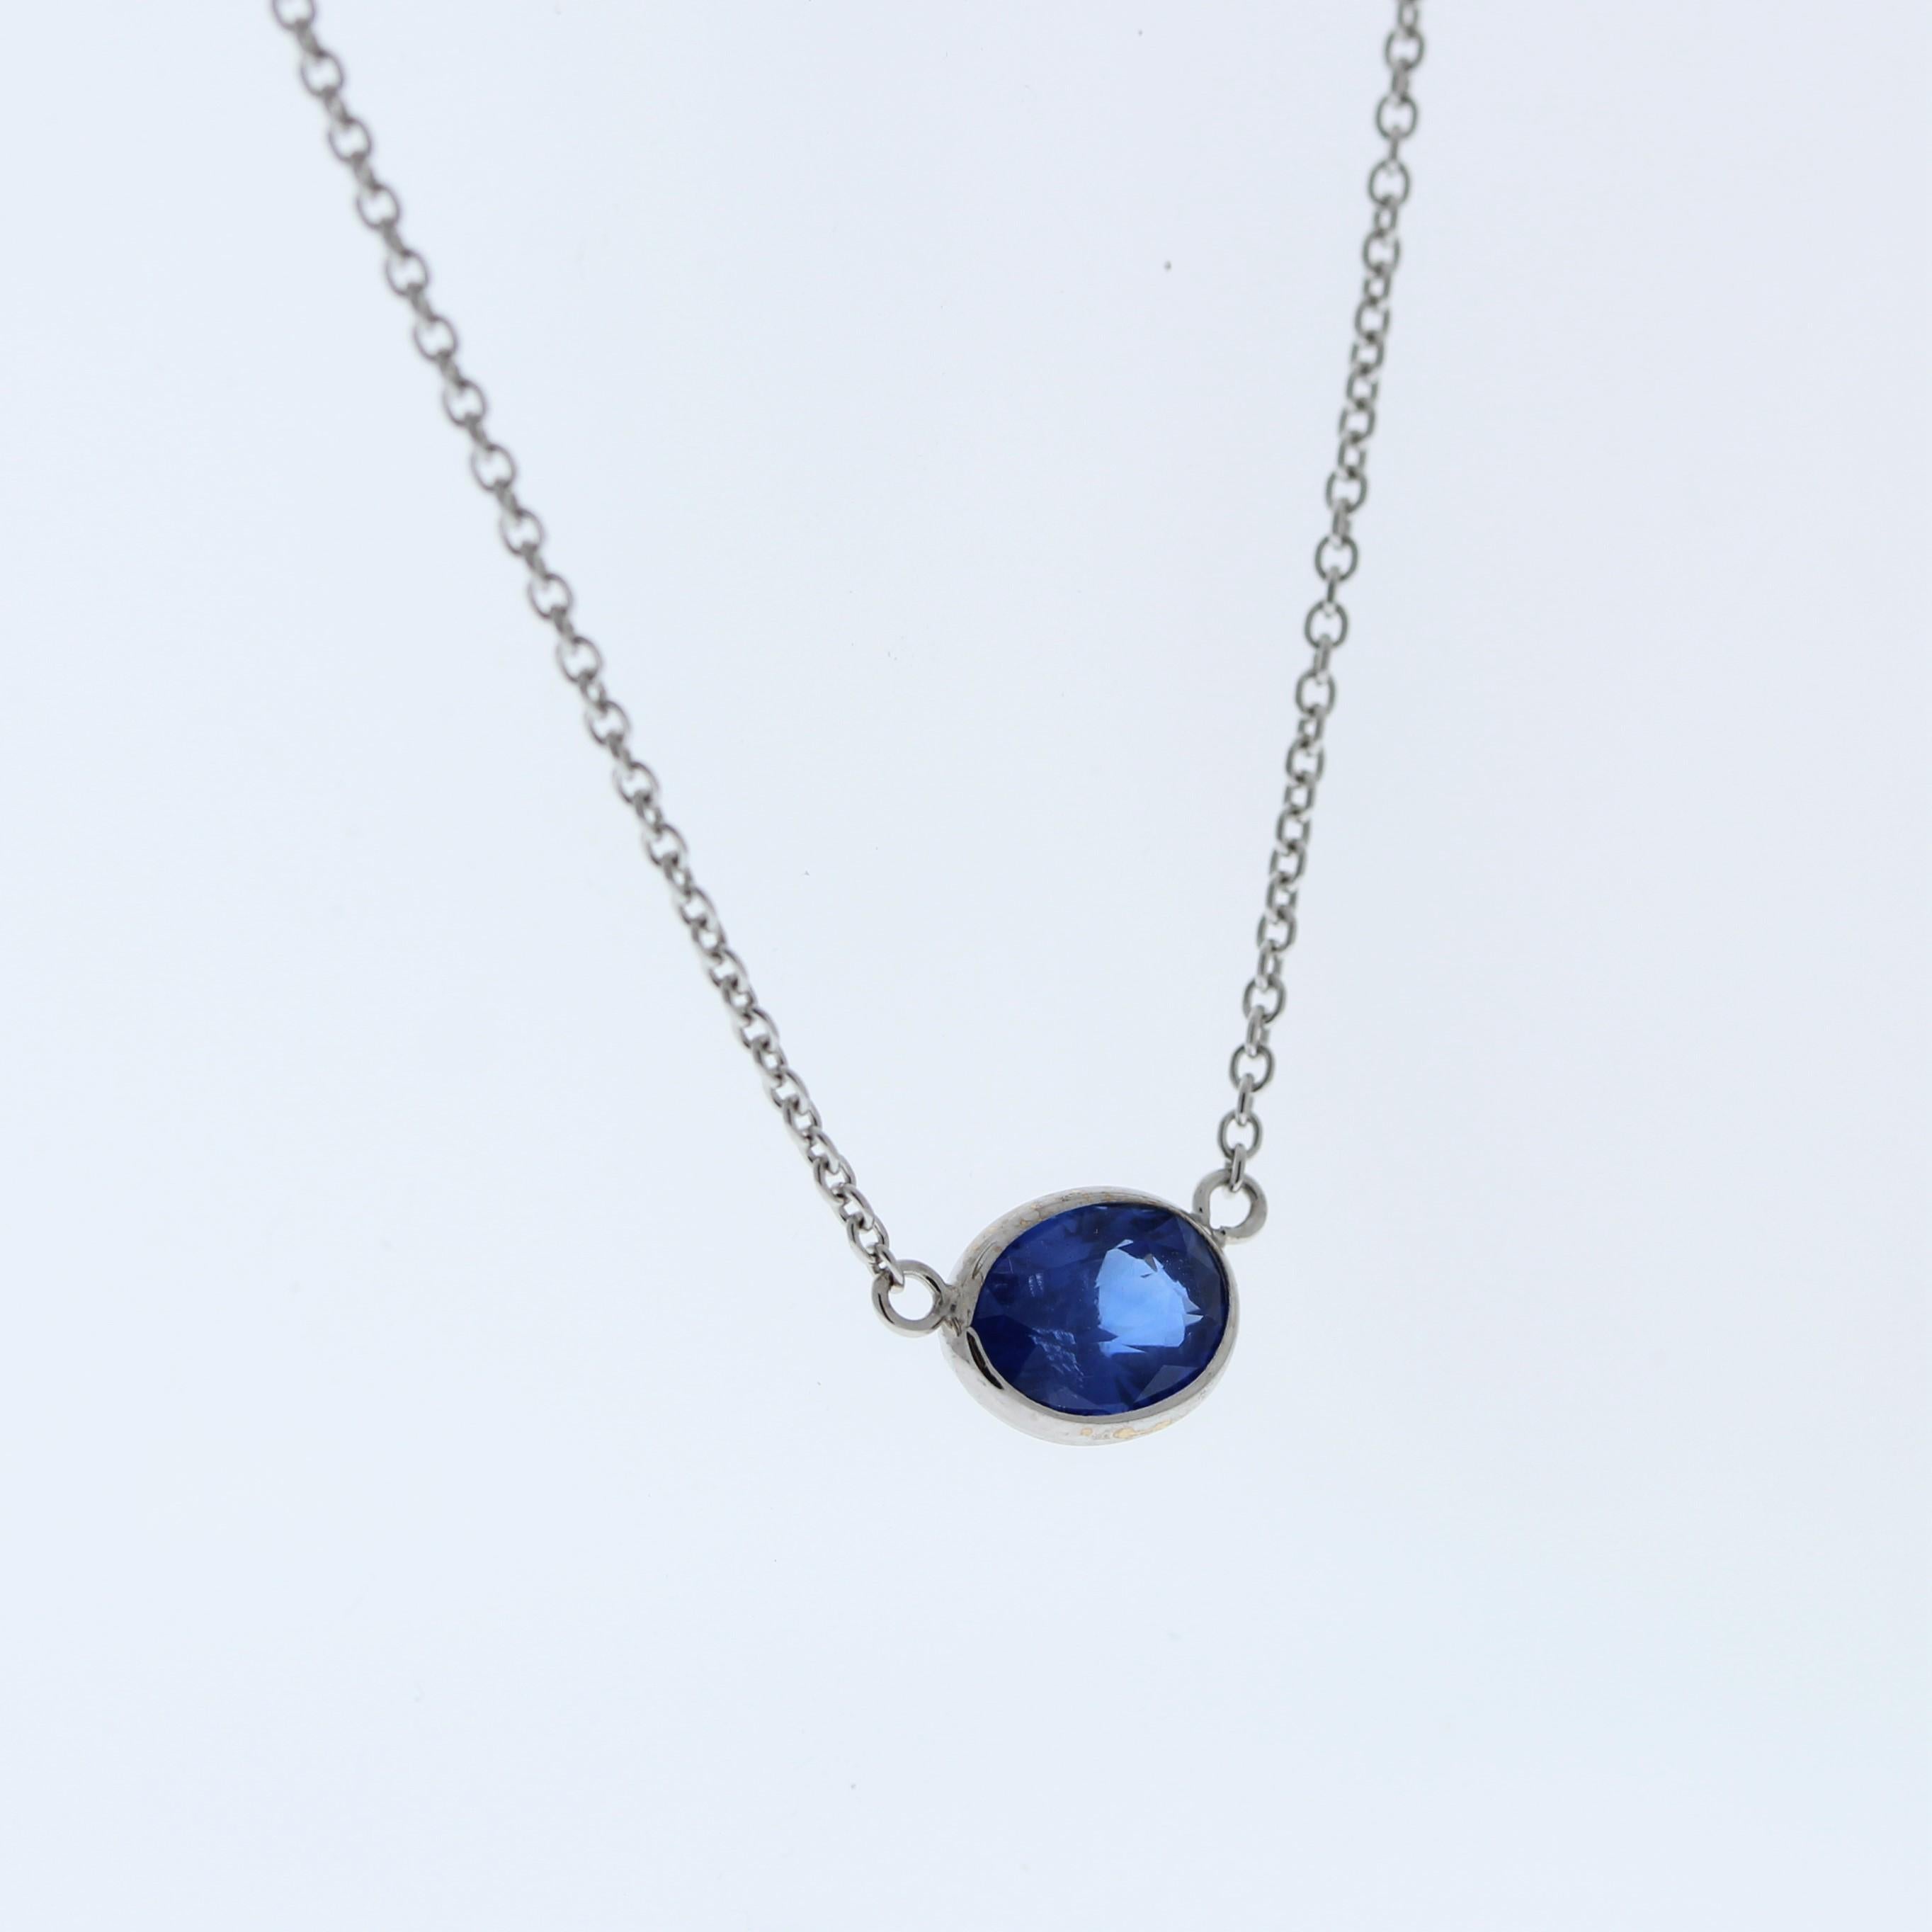 The necklace features a 1.53-carat oval-cut blue sapphire set in a 14 karat white gold pendant or setting. The oval cut and the blue sapphire's color against the white gold setting are likely to create an elegant and versatile fashion piece,